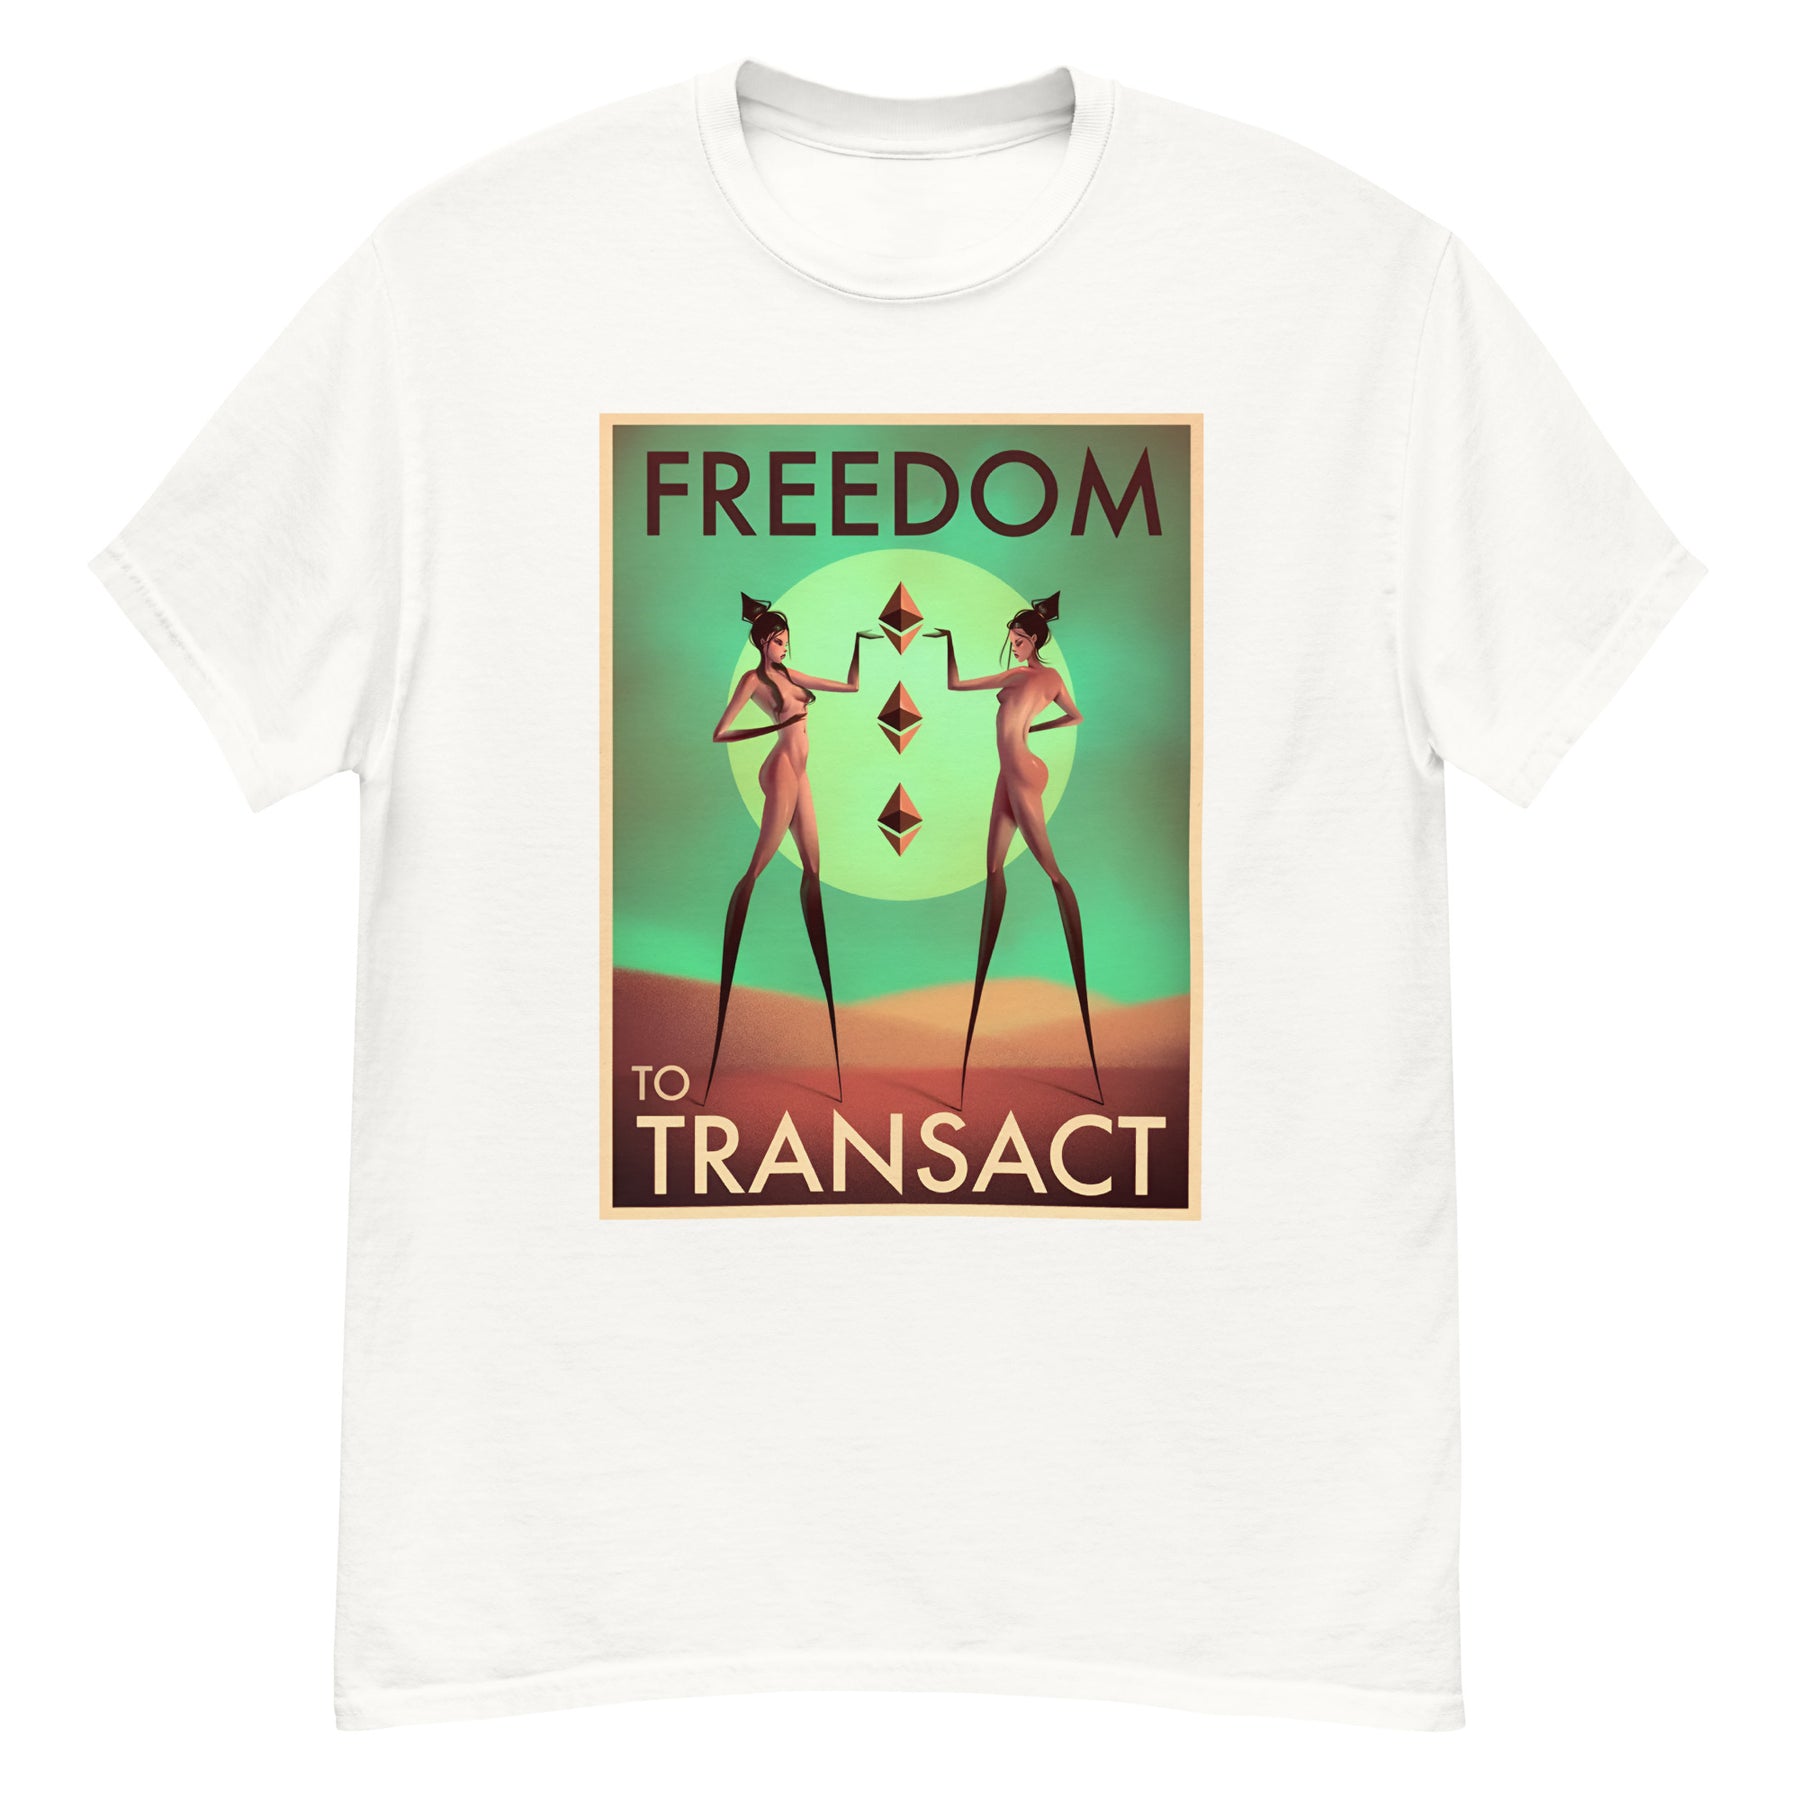 Transcendent Trades by Camibus | Classic tee